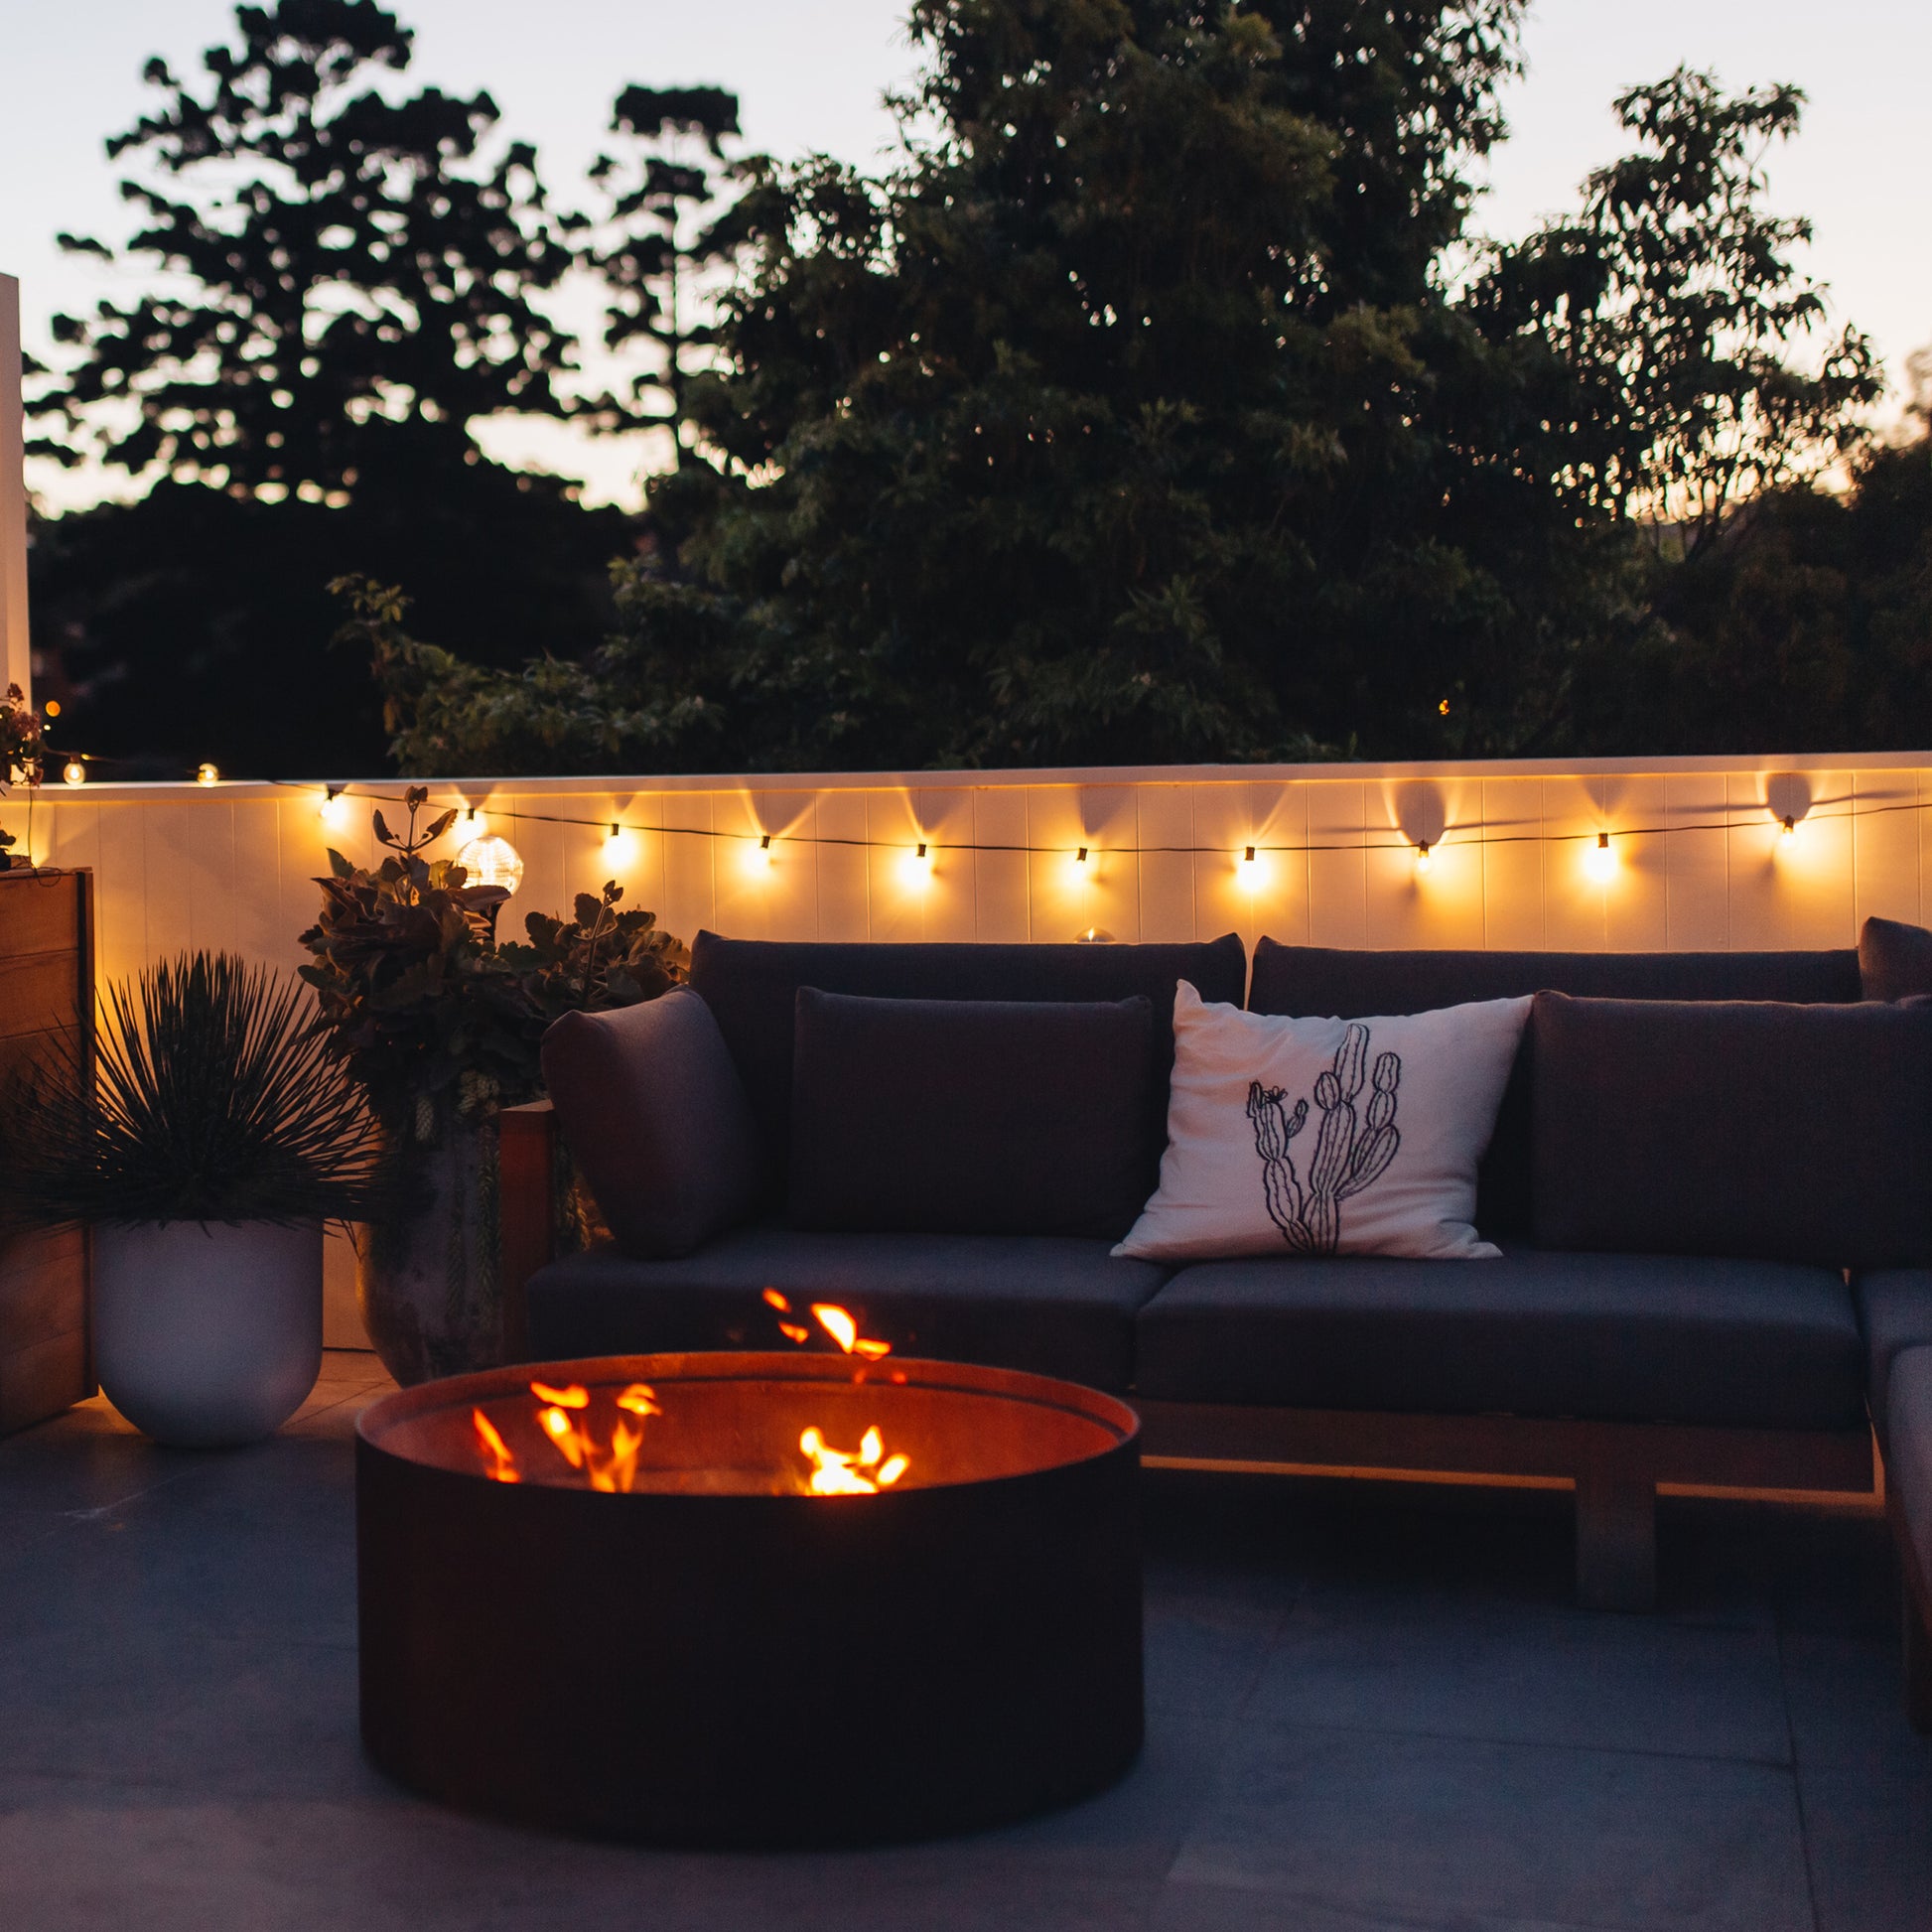 warm white solar party lights used to decorate an outdoor sitting area